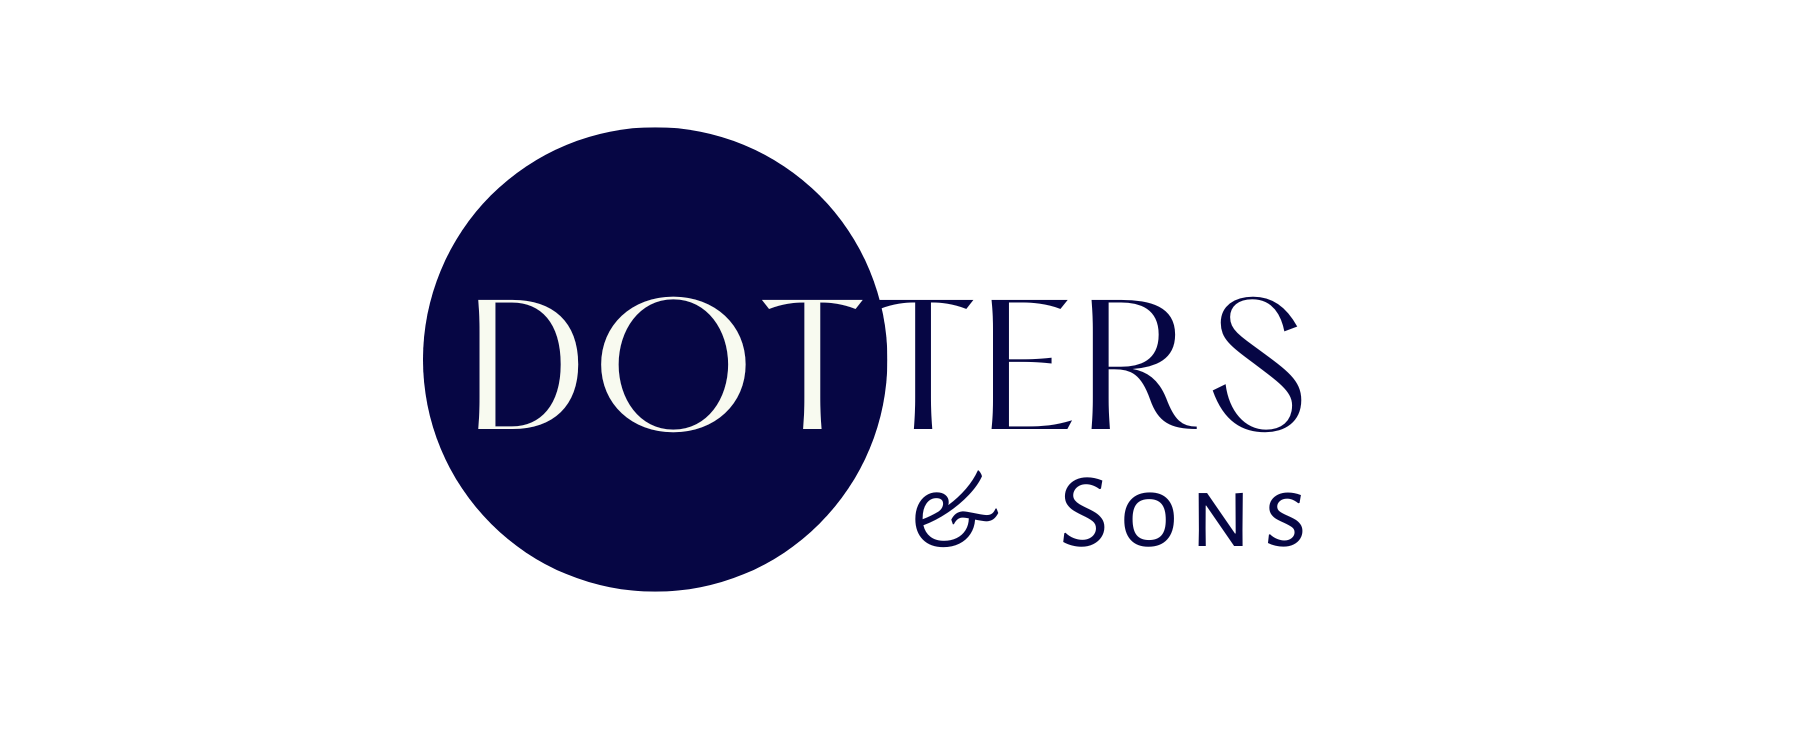 Dotters & Sons